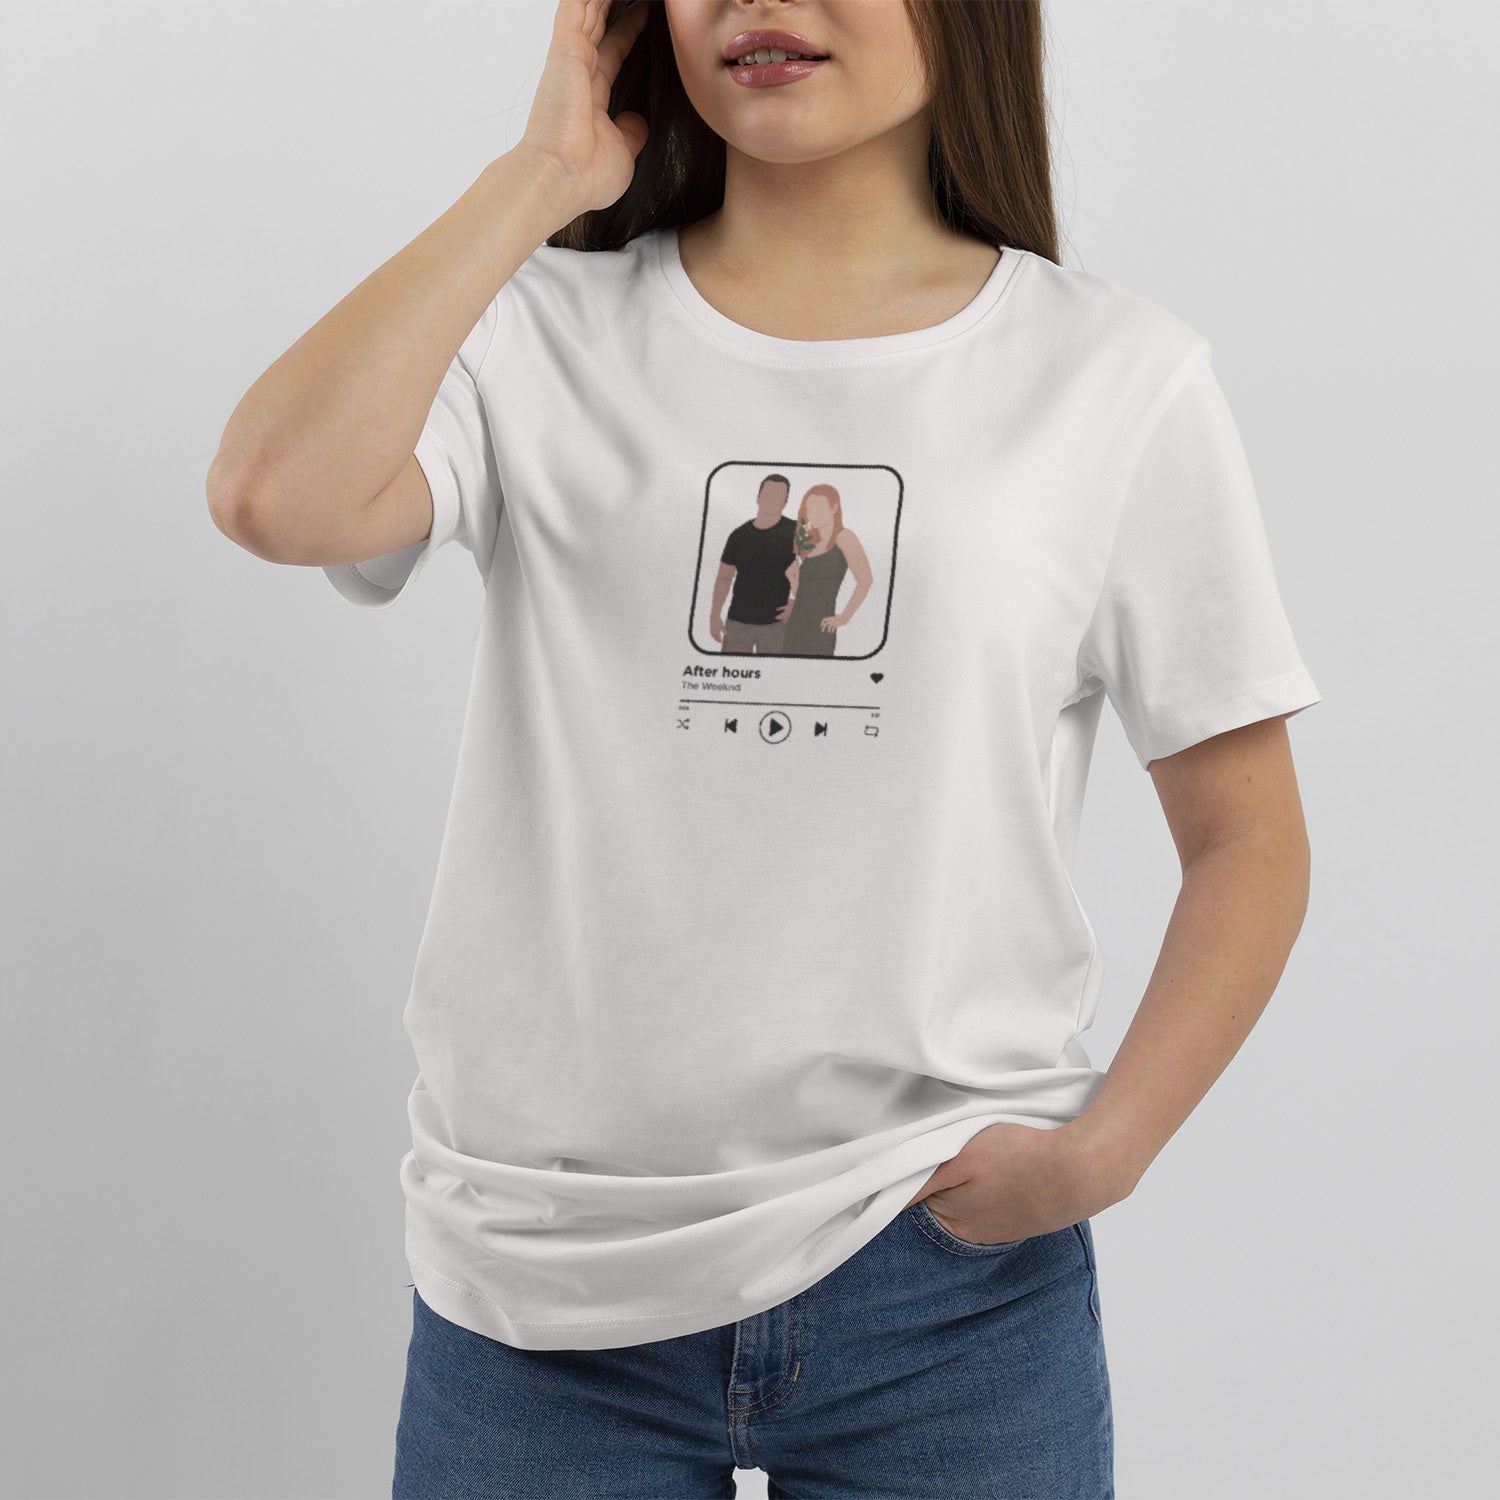 Personalisiertes T-Shirt Spotify Song Mit Illustration